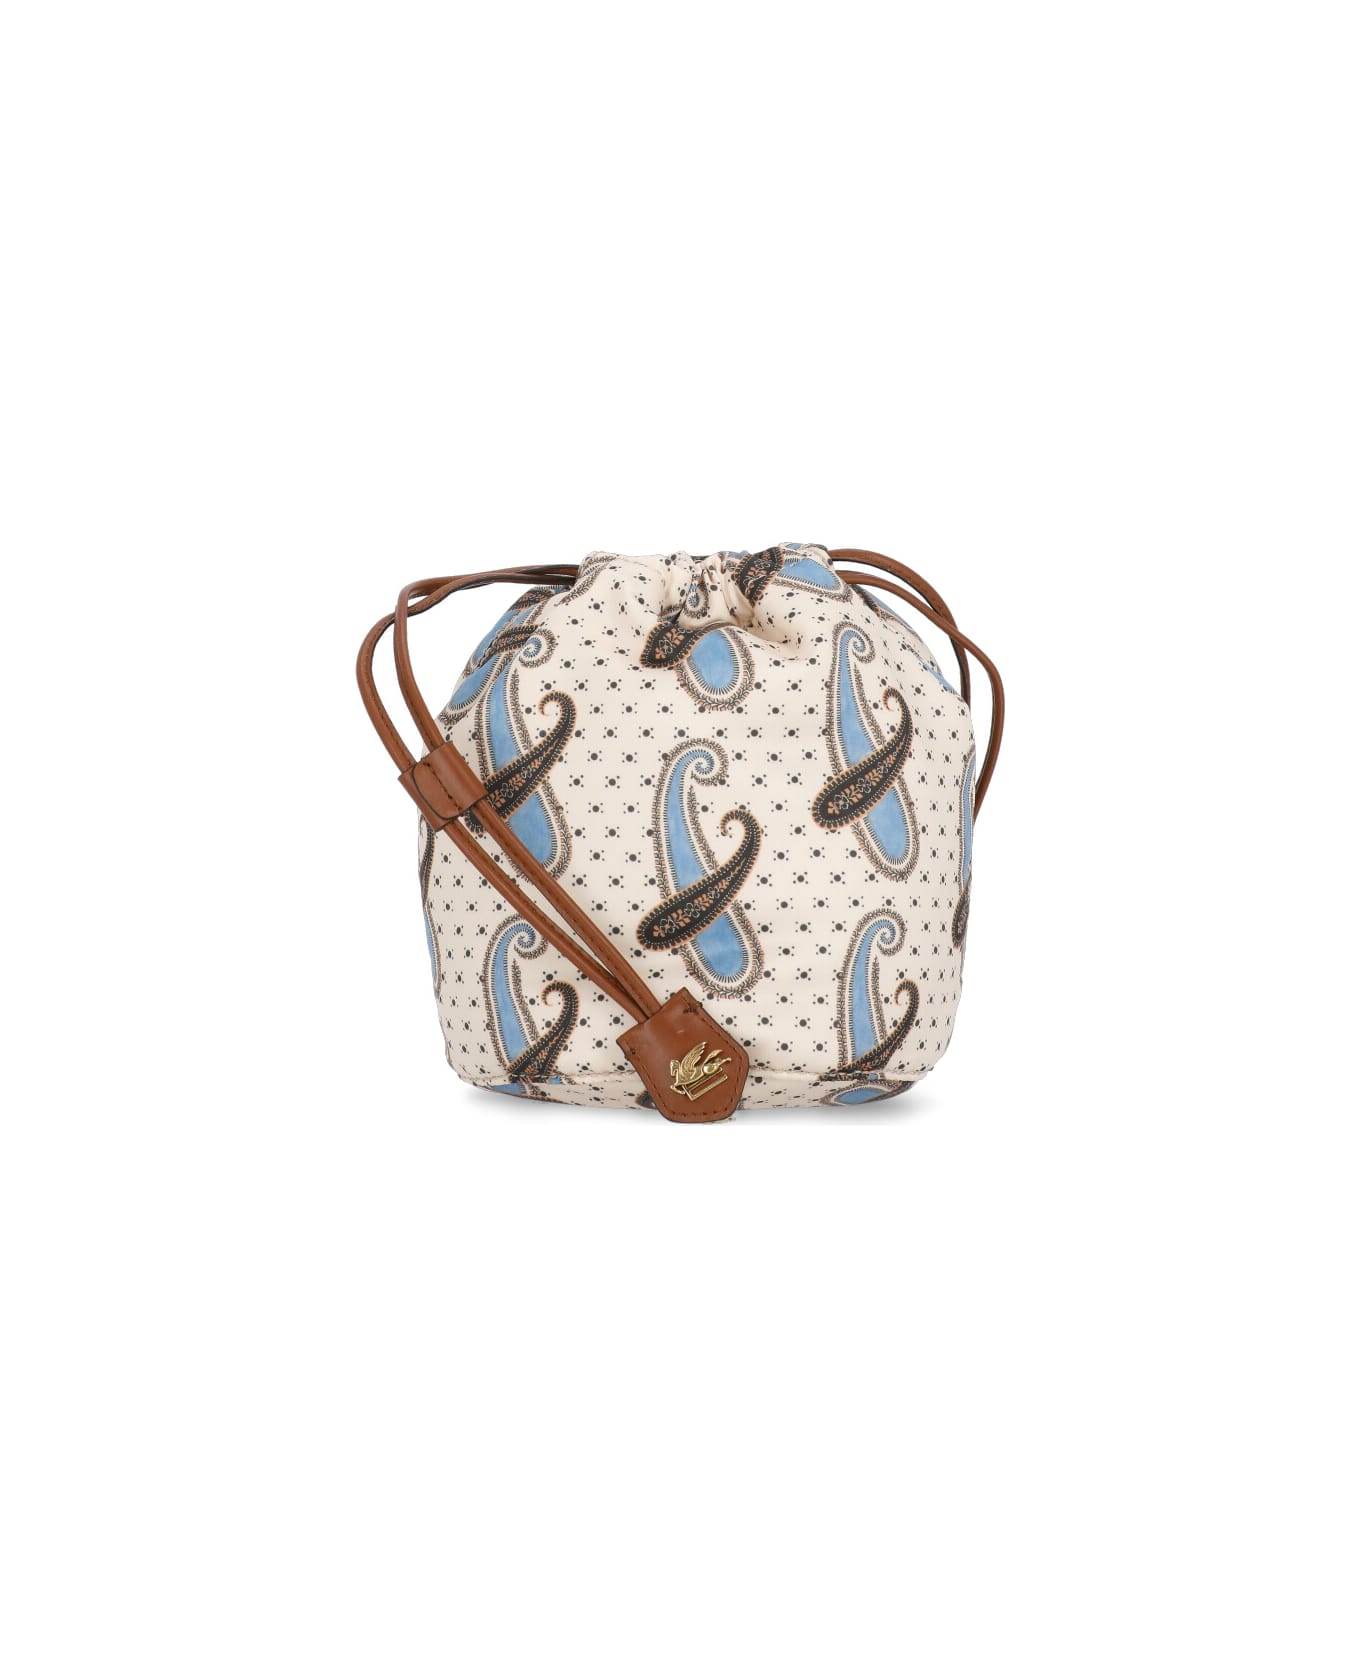 Etro Pouch With Paisley Pattern And Polka Dots - Multicolor